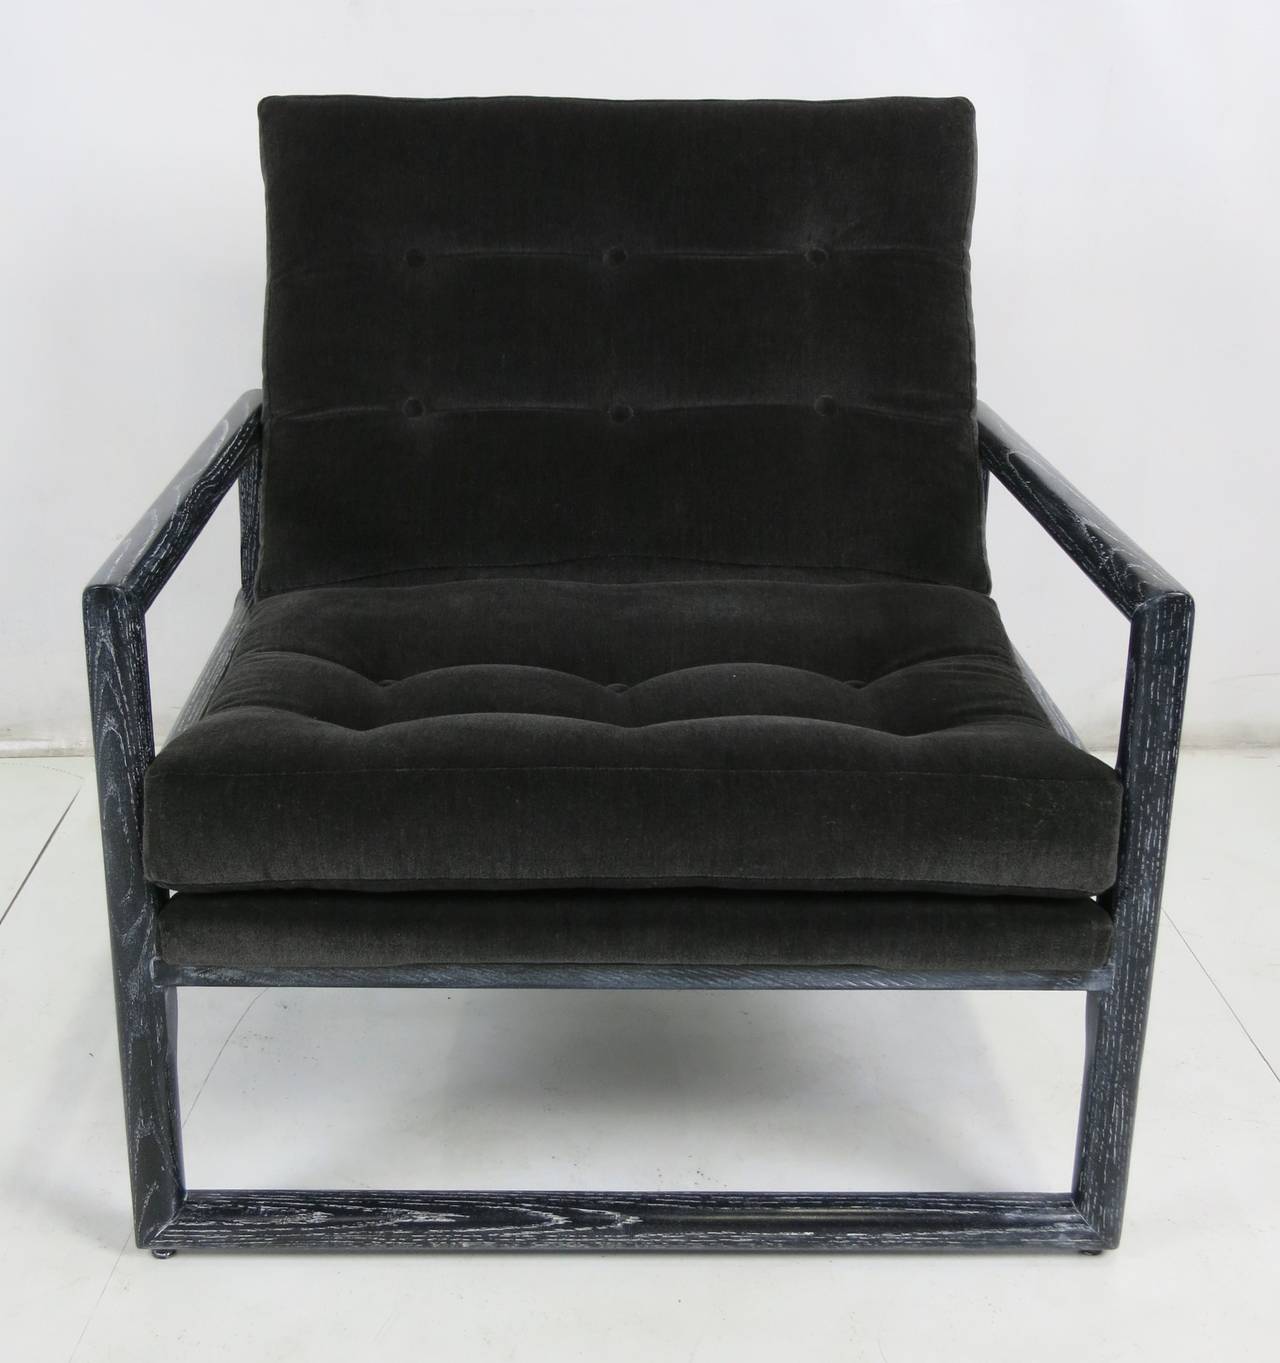 Meticulously restored oak frame scoop chairs. The frames have been reglued and refinished and the seats have been freshly upholstered in heavy weight charcoal grey velvet.